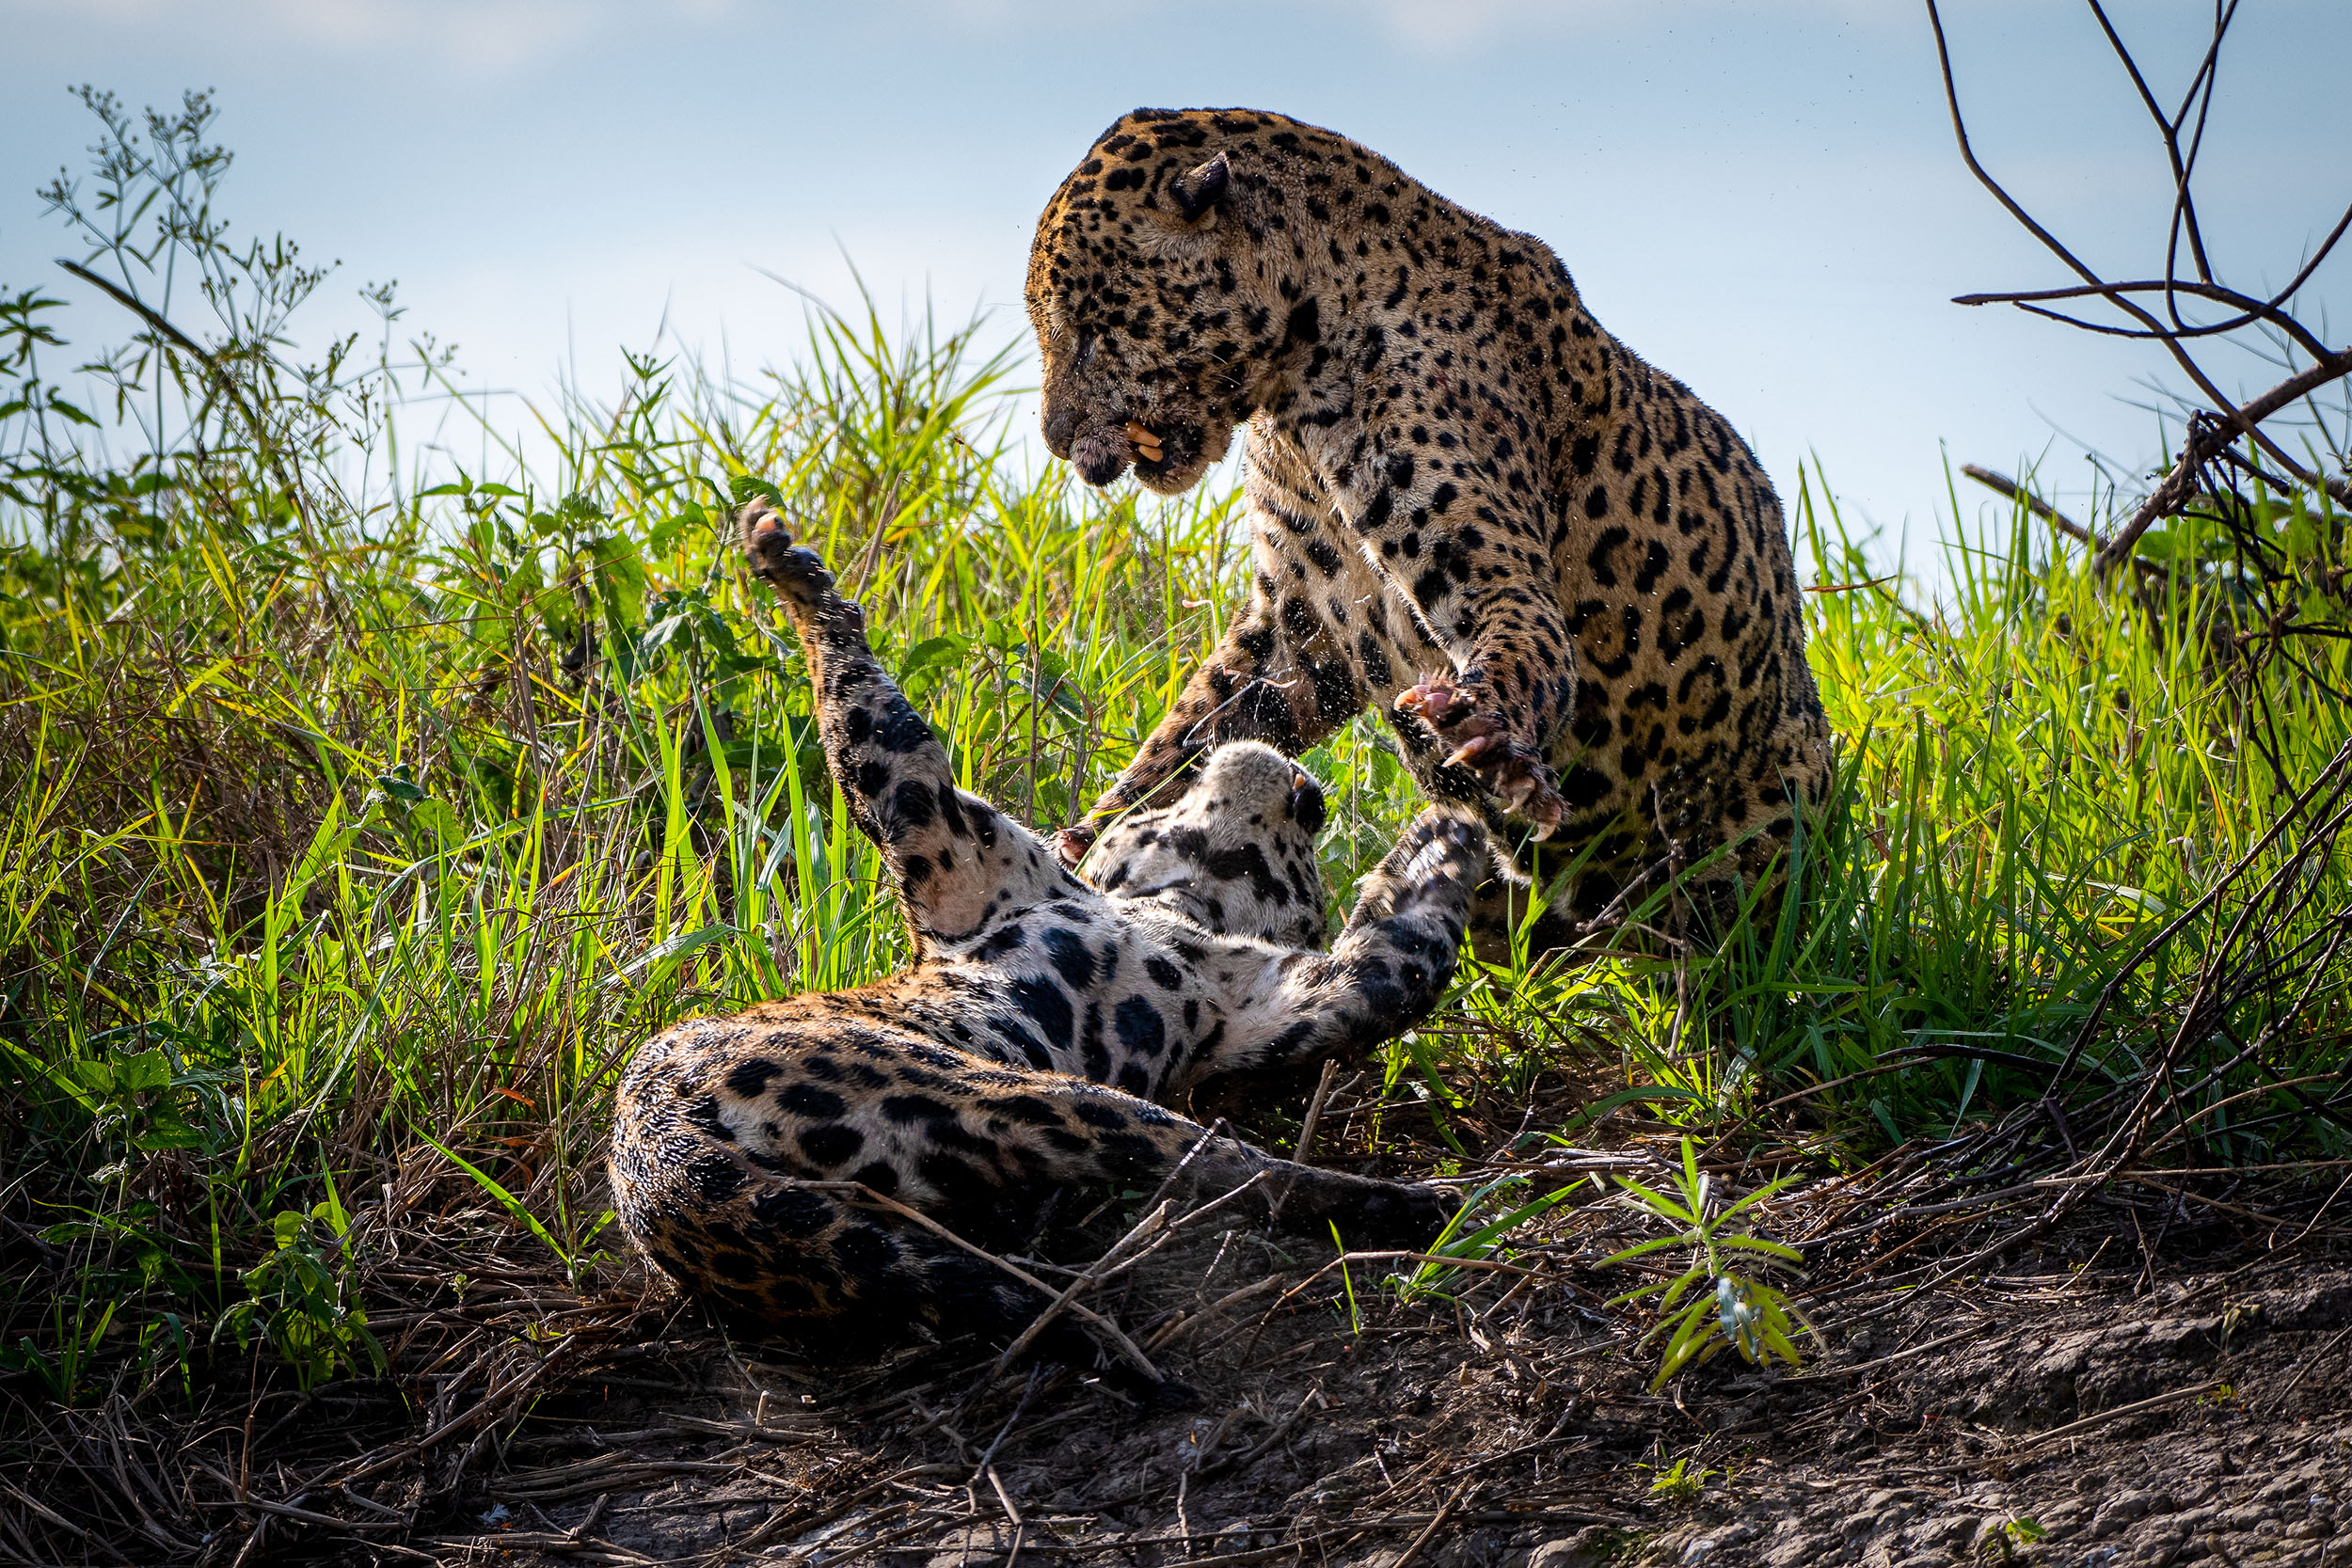 Two jaguars play in the grass in the Amazon rainforest